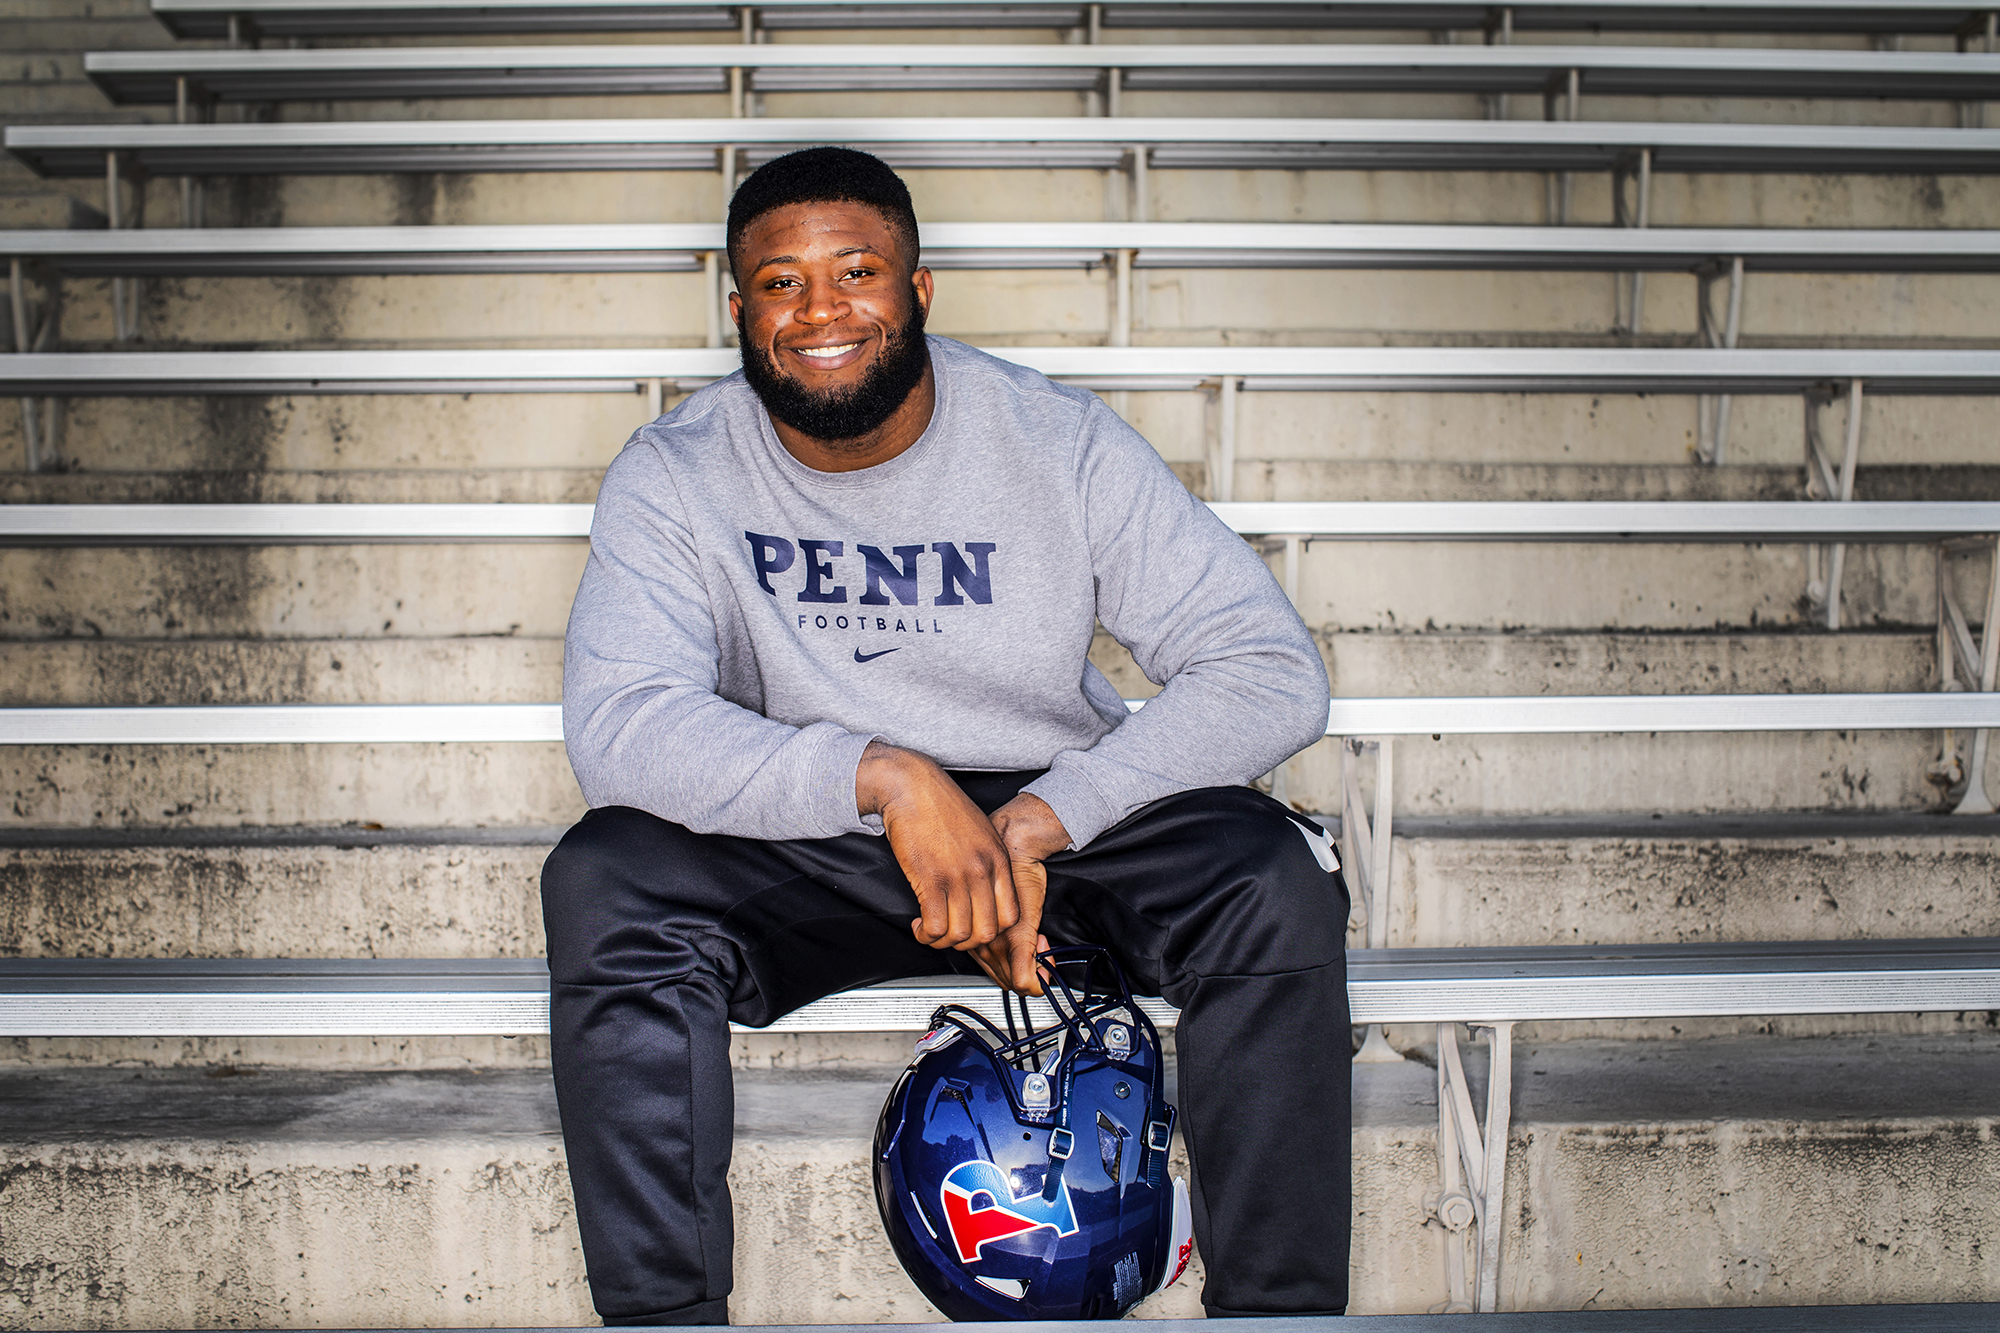 Prince Emili of the football team sits in the Franklin Field bleachers with his helmet in his hand.